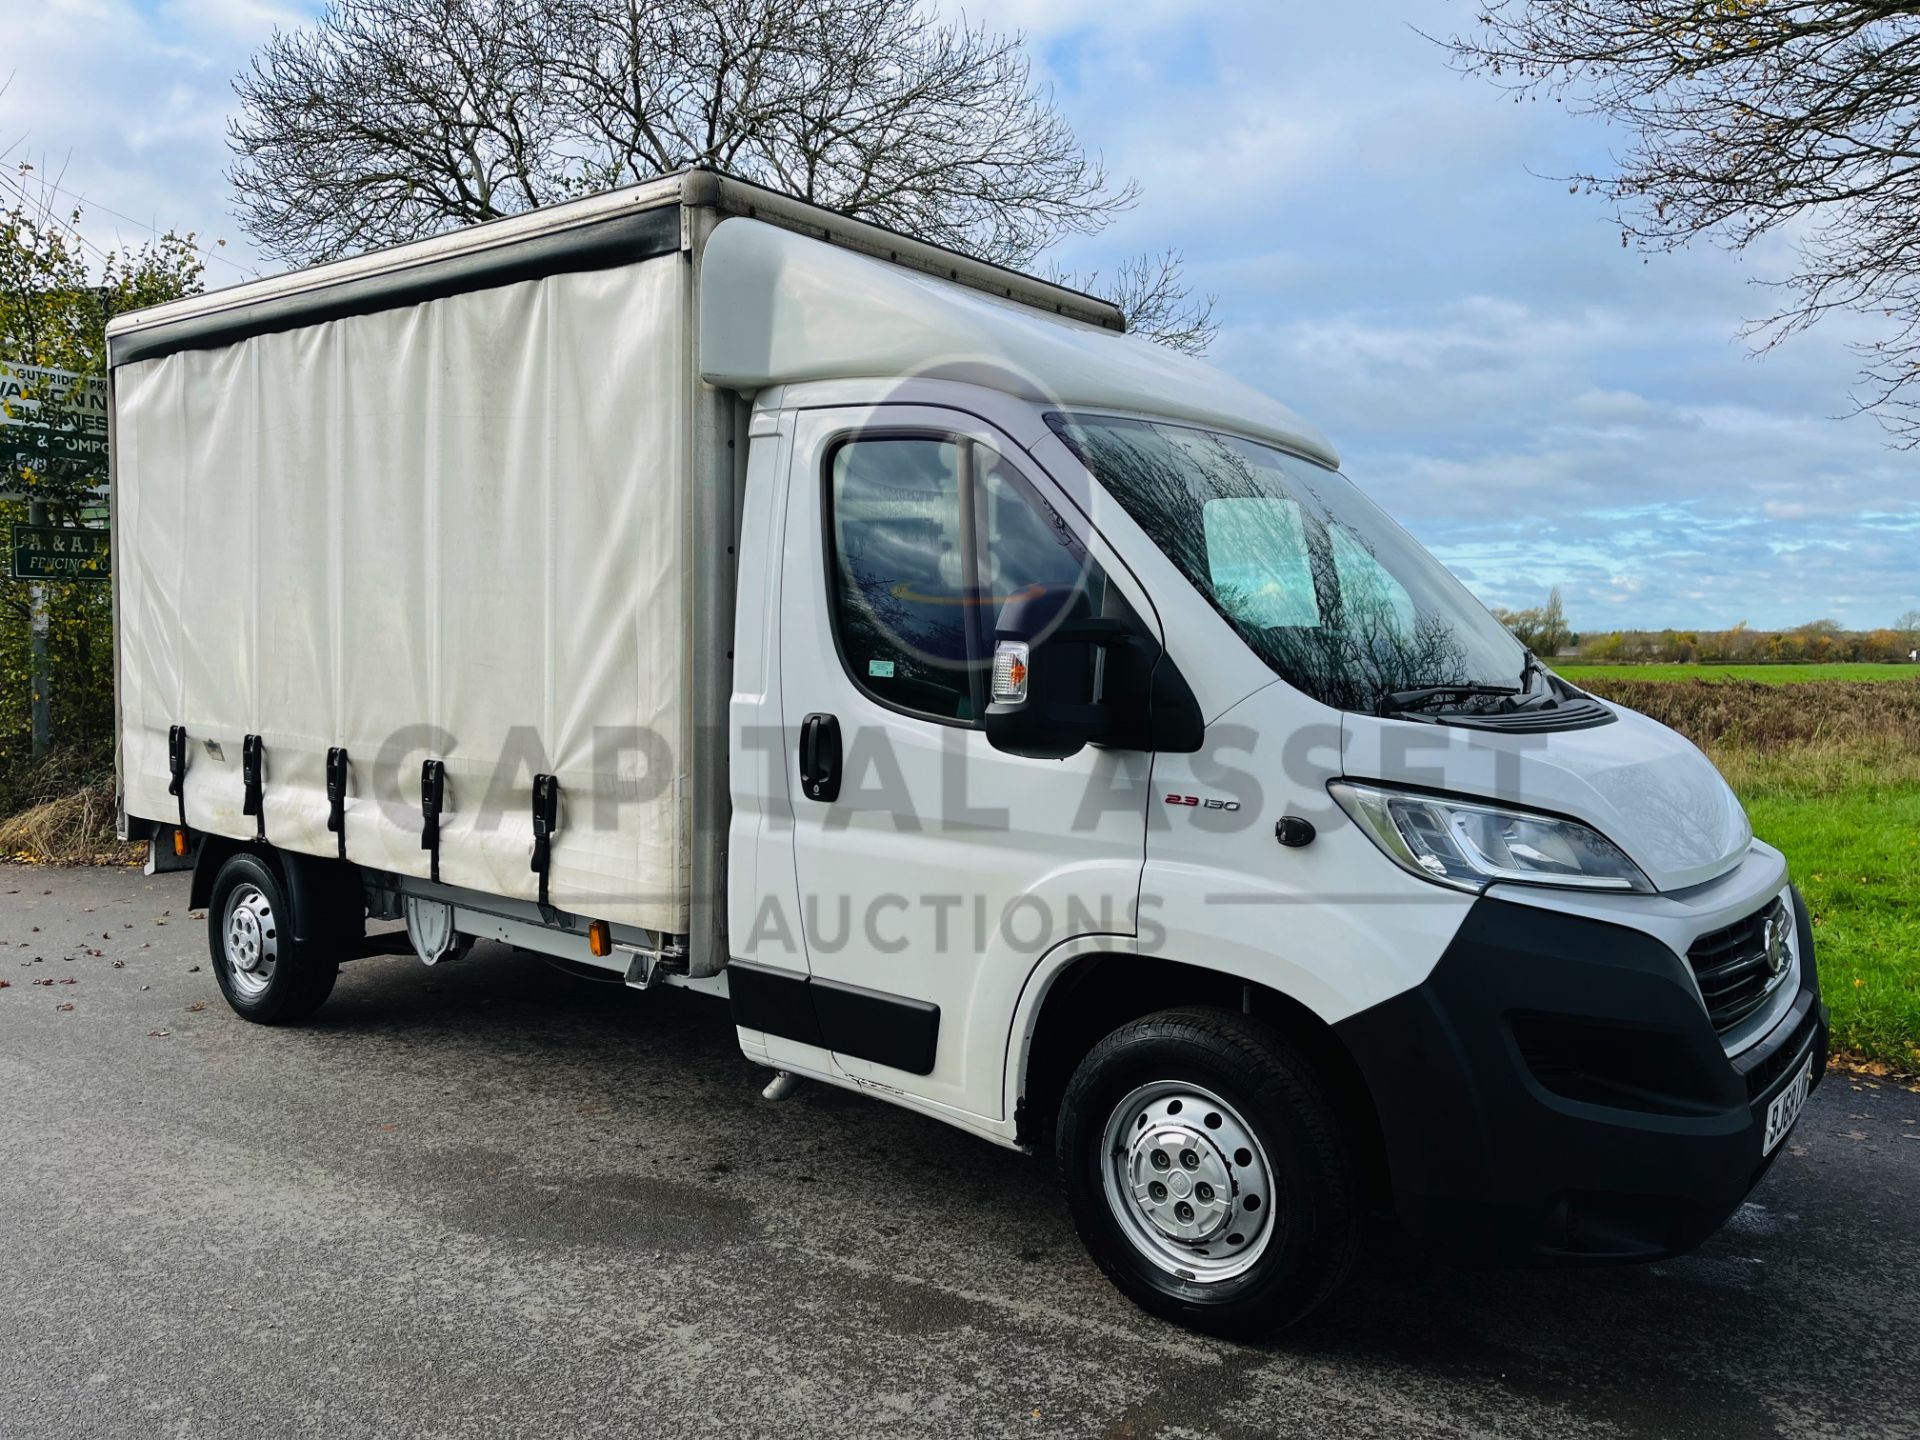 (ON SALE) FIAT DUCATO 2.3 MULTIJET (2019 MODEL) RARE CURTAIN SIDE BODY - 1 OWNER - 360 CAMERA VIEW - Image 2 of 24